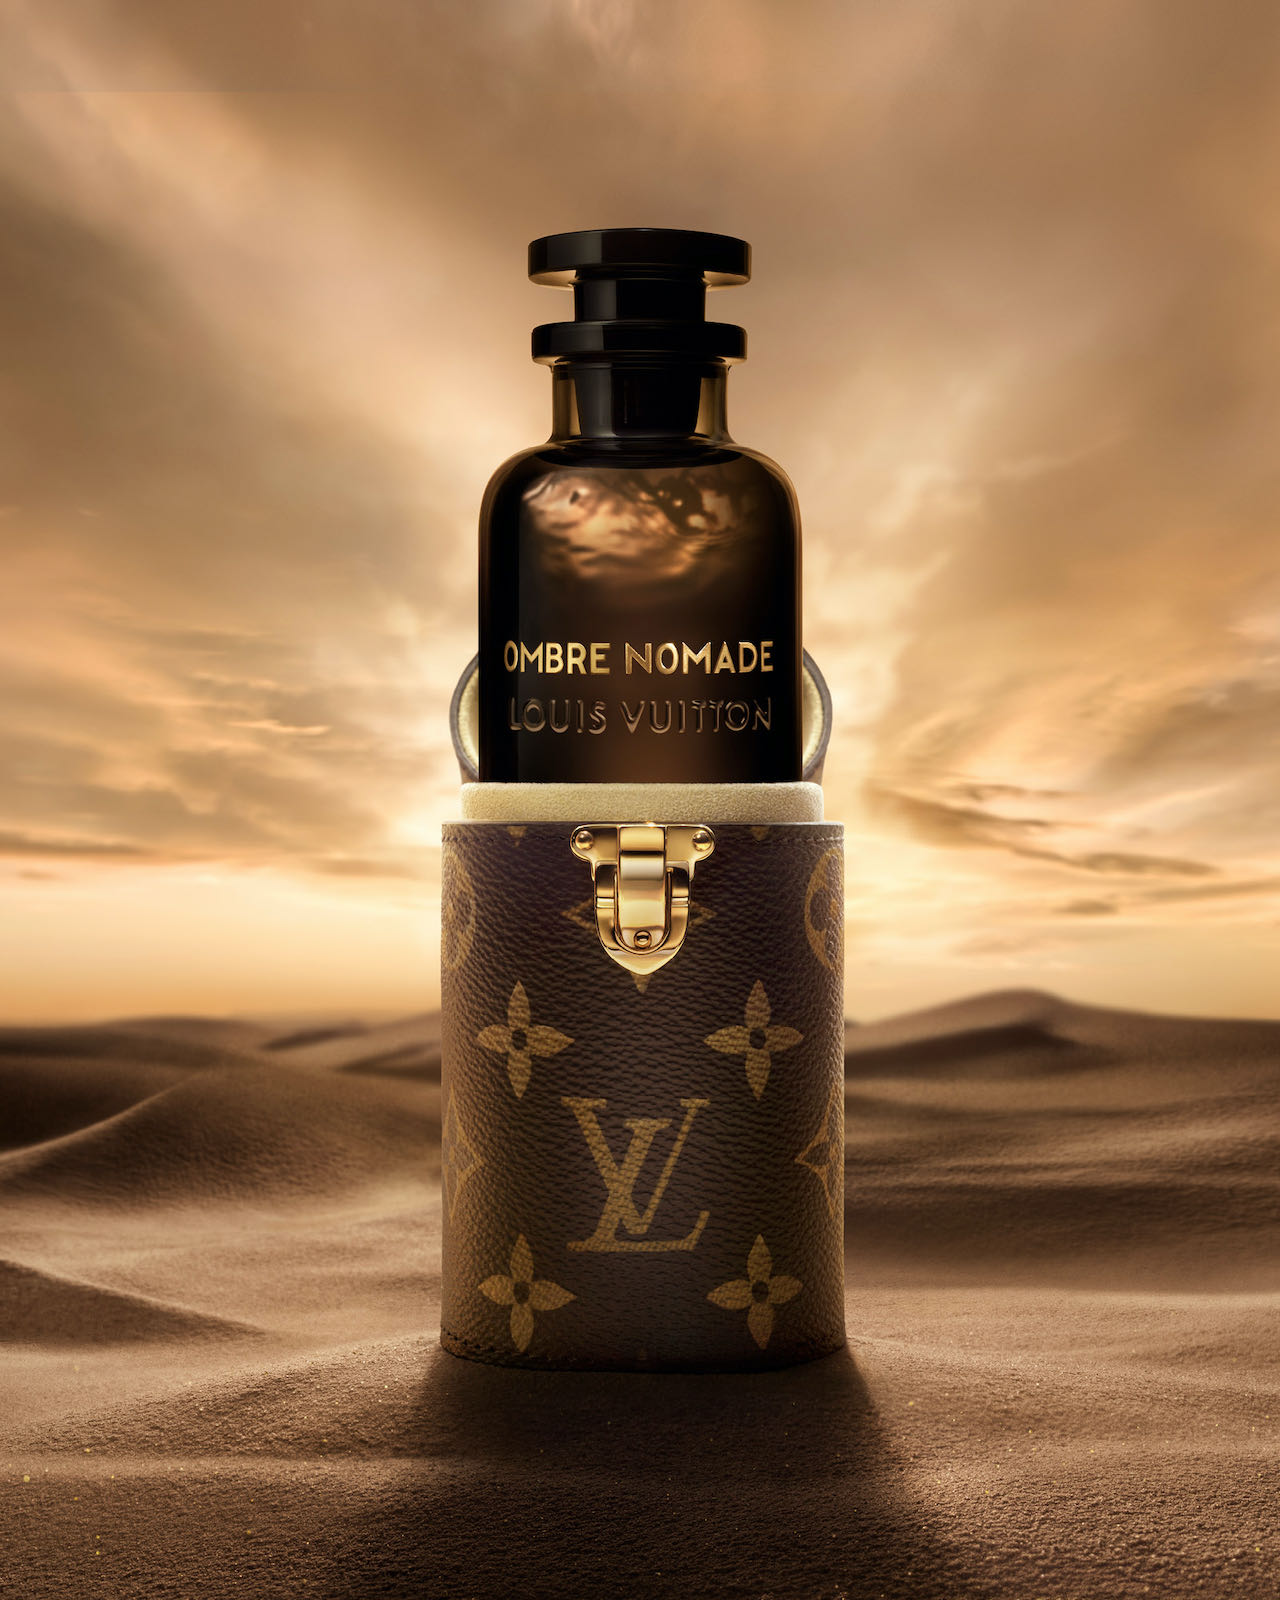 Louis Vuitton Ombre Nomade- the new campaign from Les Parfums